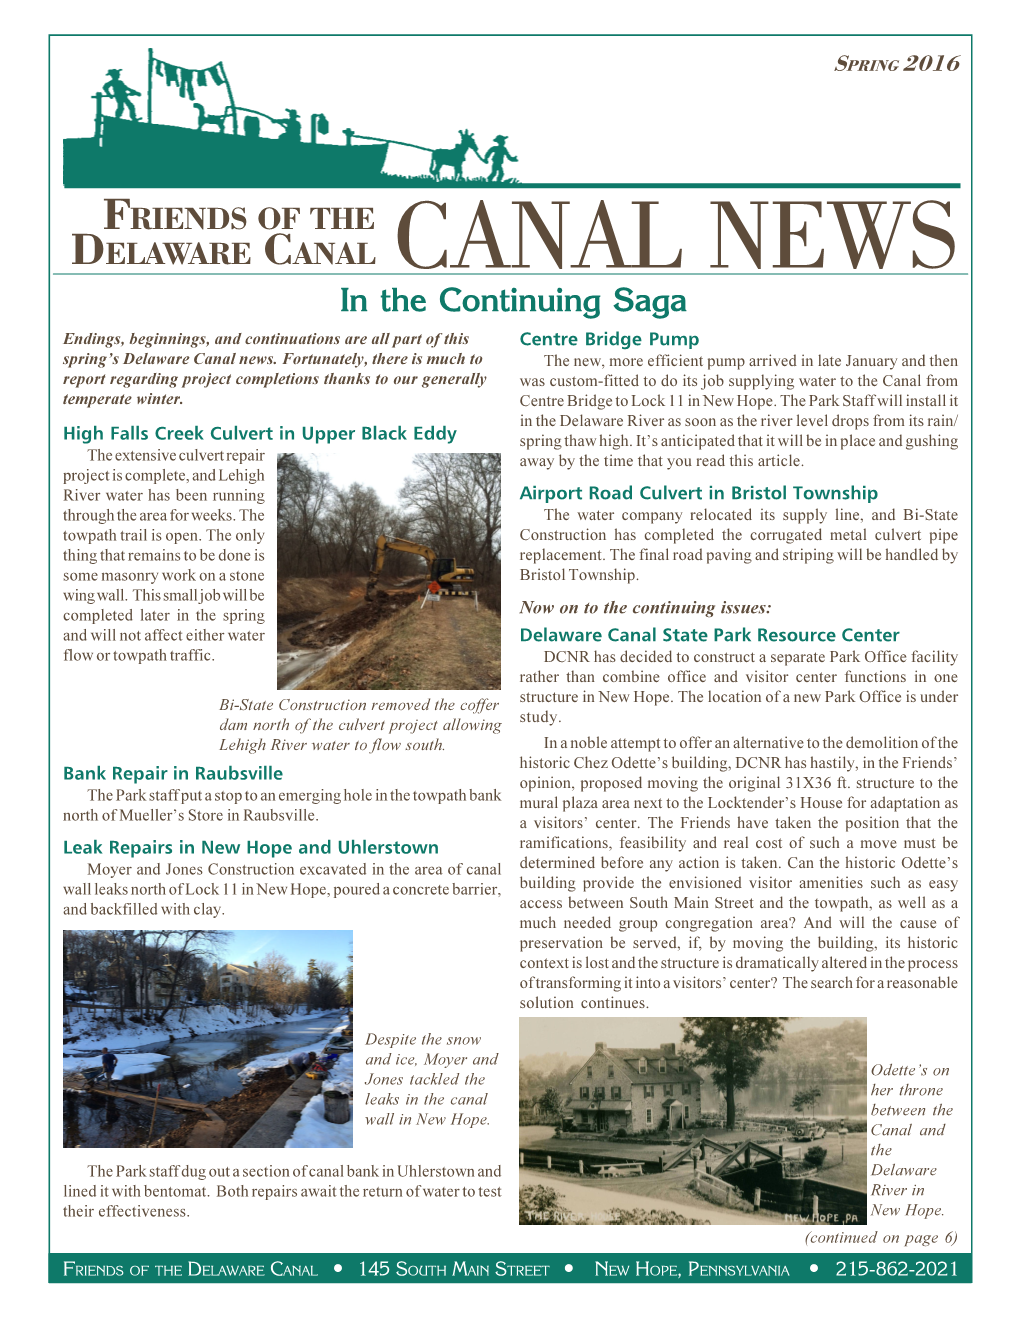 NEWS in the Continuing Saga Endings, Beginnings, and Continuations Are All Part of This Centre Bridge Pump Spring’S Delaware Canal News